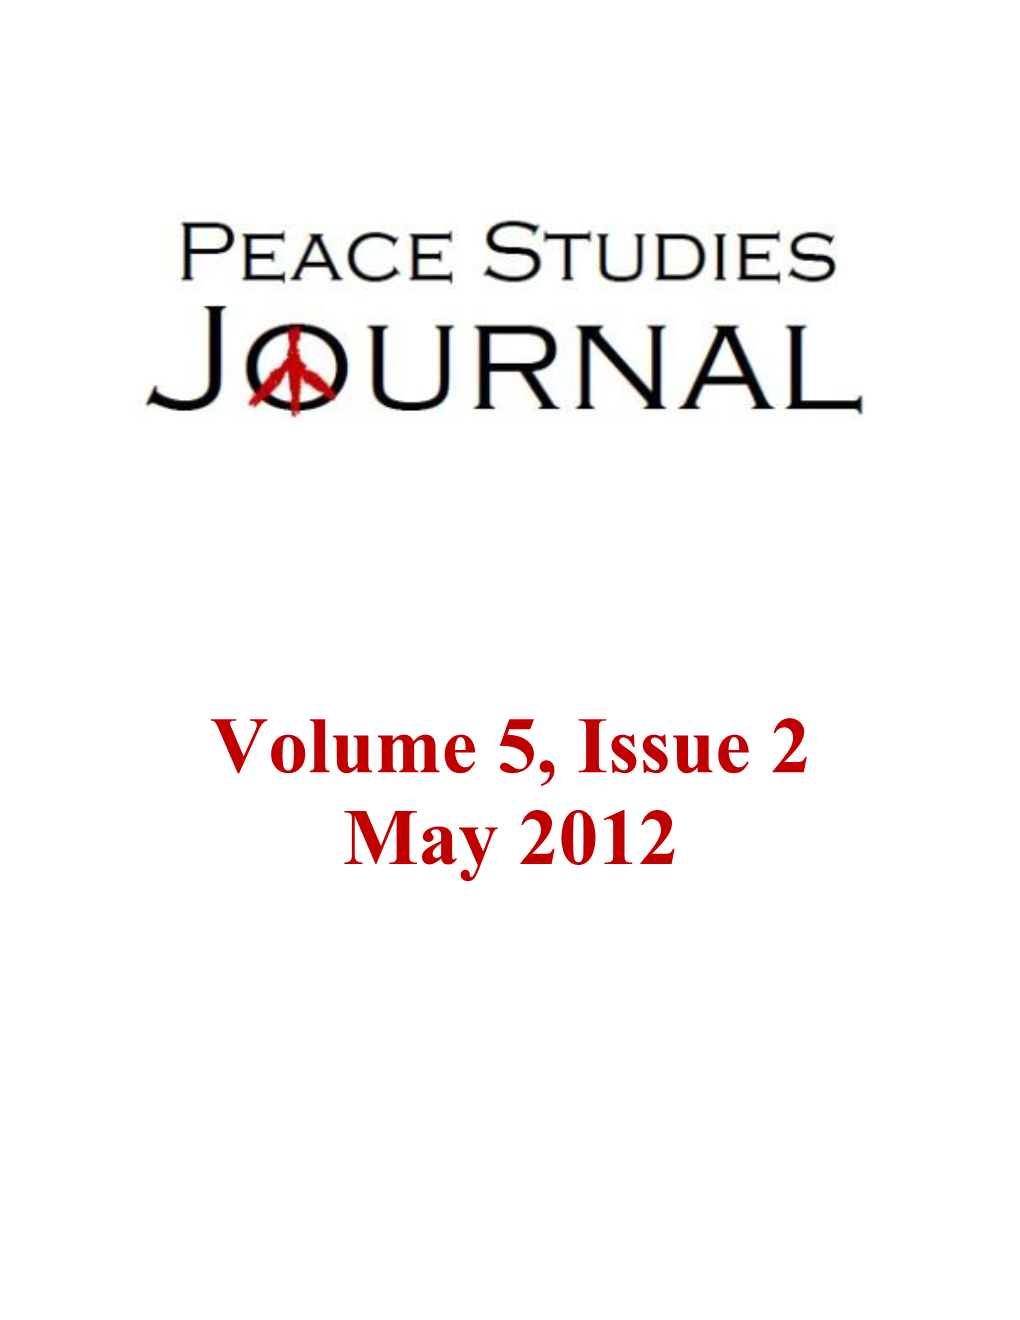 PDF – Volume 5, Issue 2, May 2012